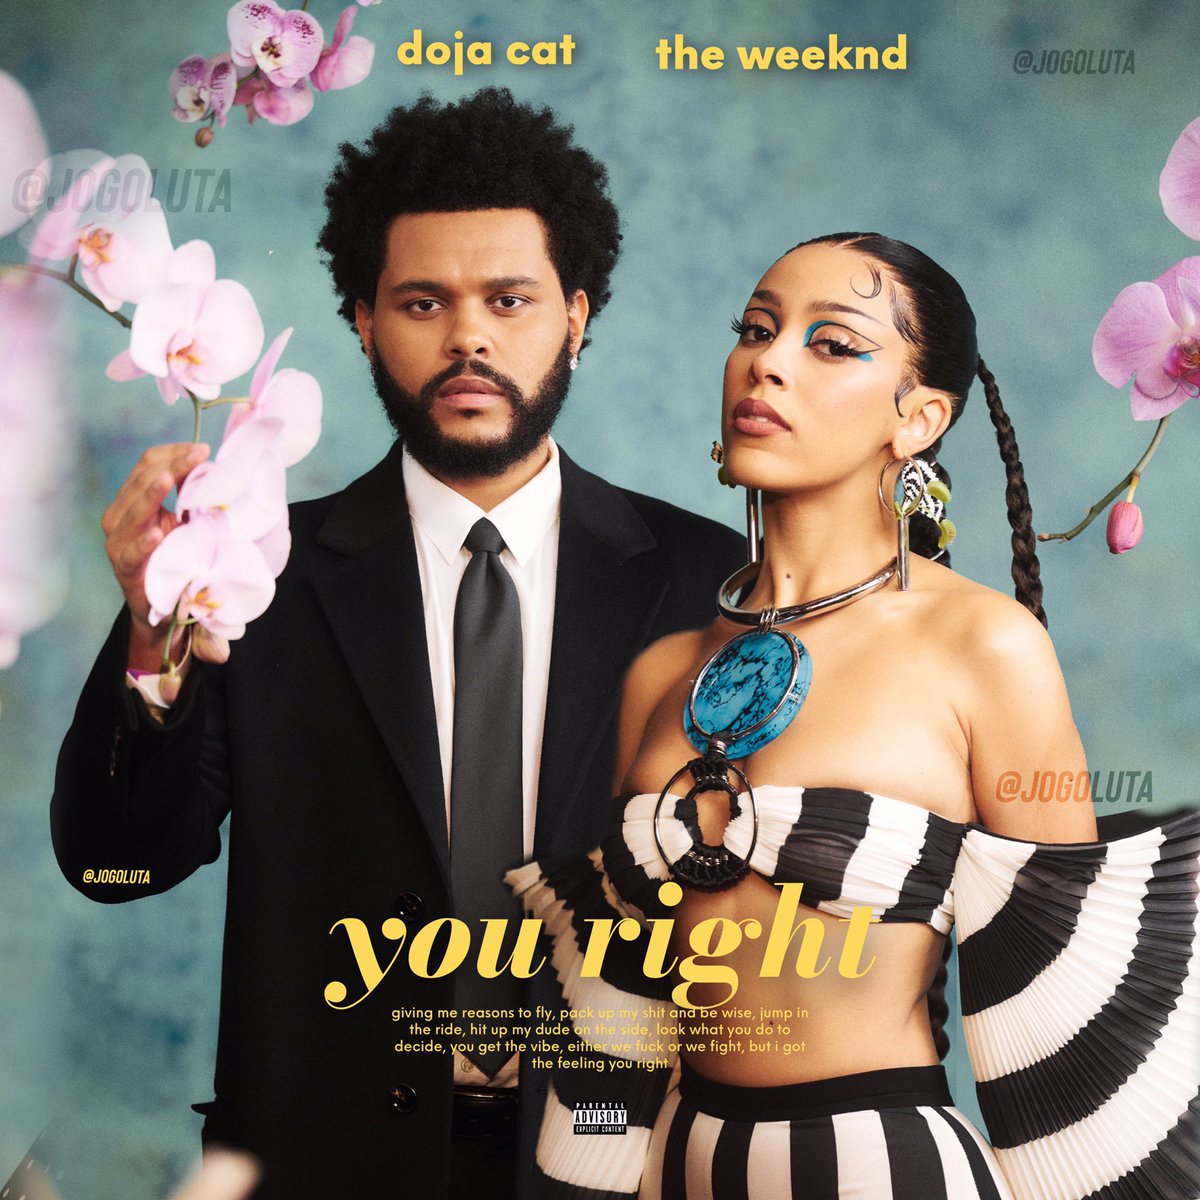 Doja Cat premieres new collaboration “You Right” with The Weeknd and